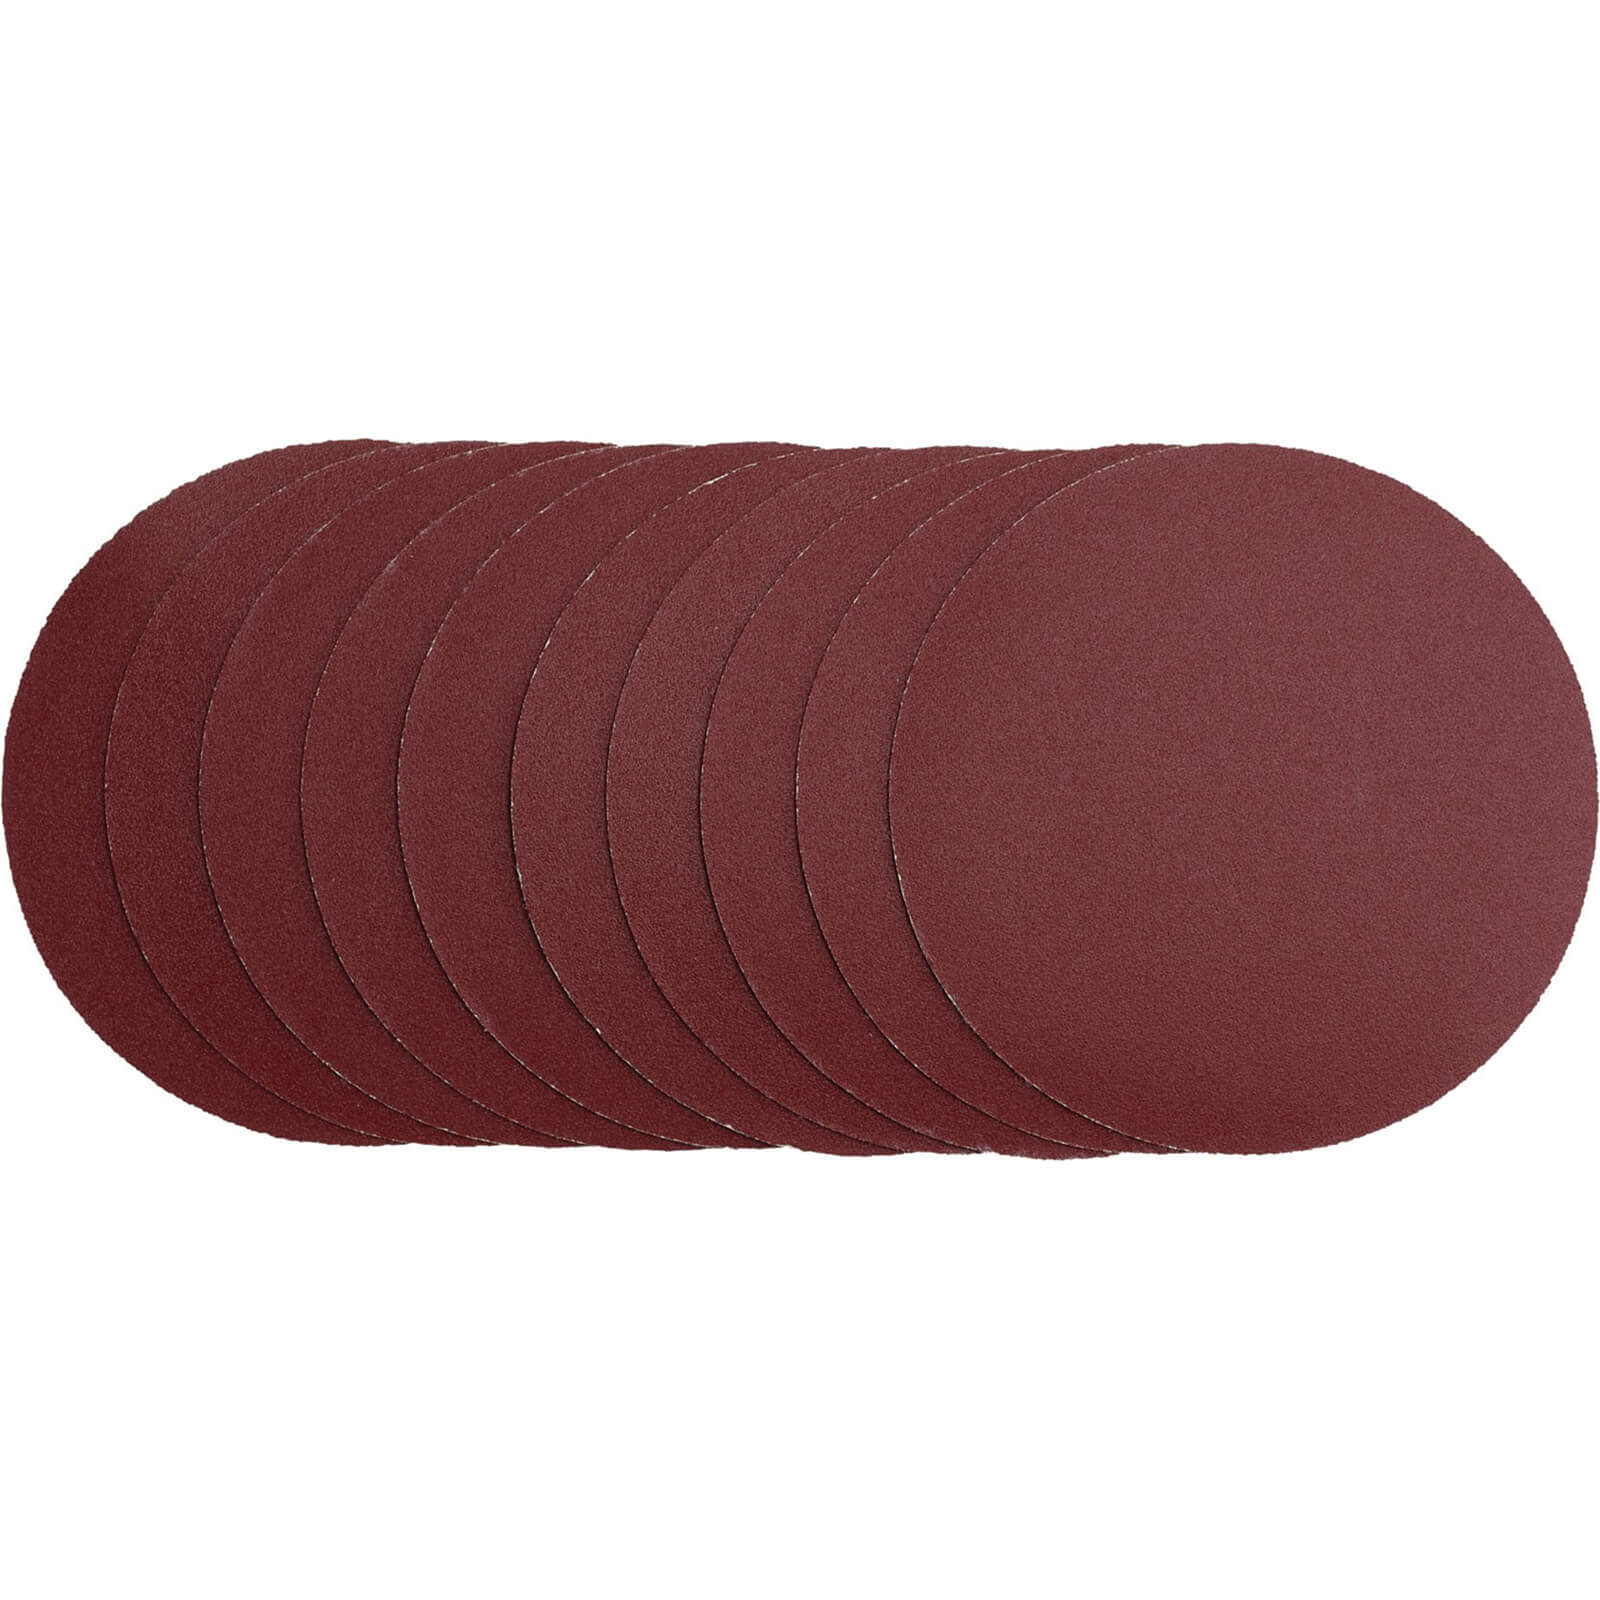 Image of Draper Unpunched Hook and Loop Sanding Discs 125mm 125mm 240g Pack of 10